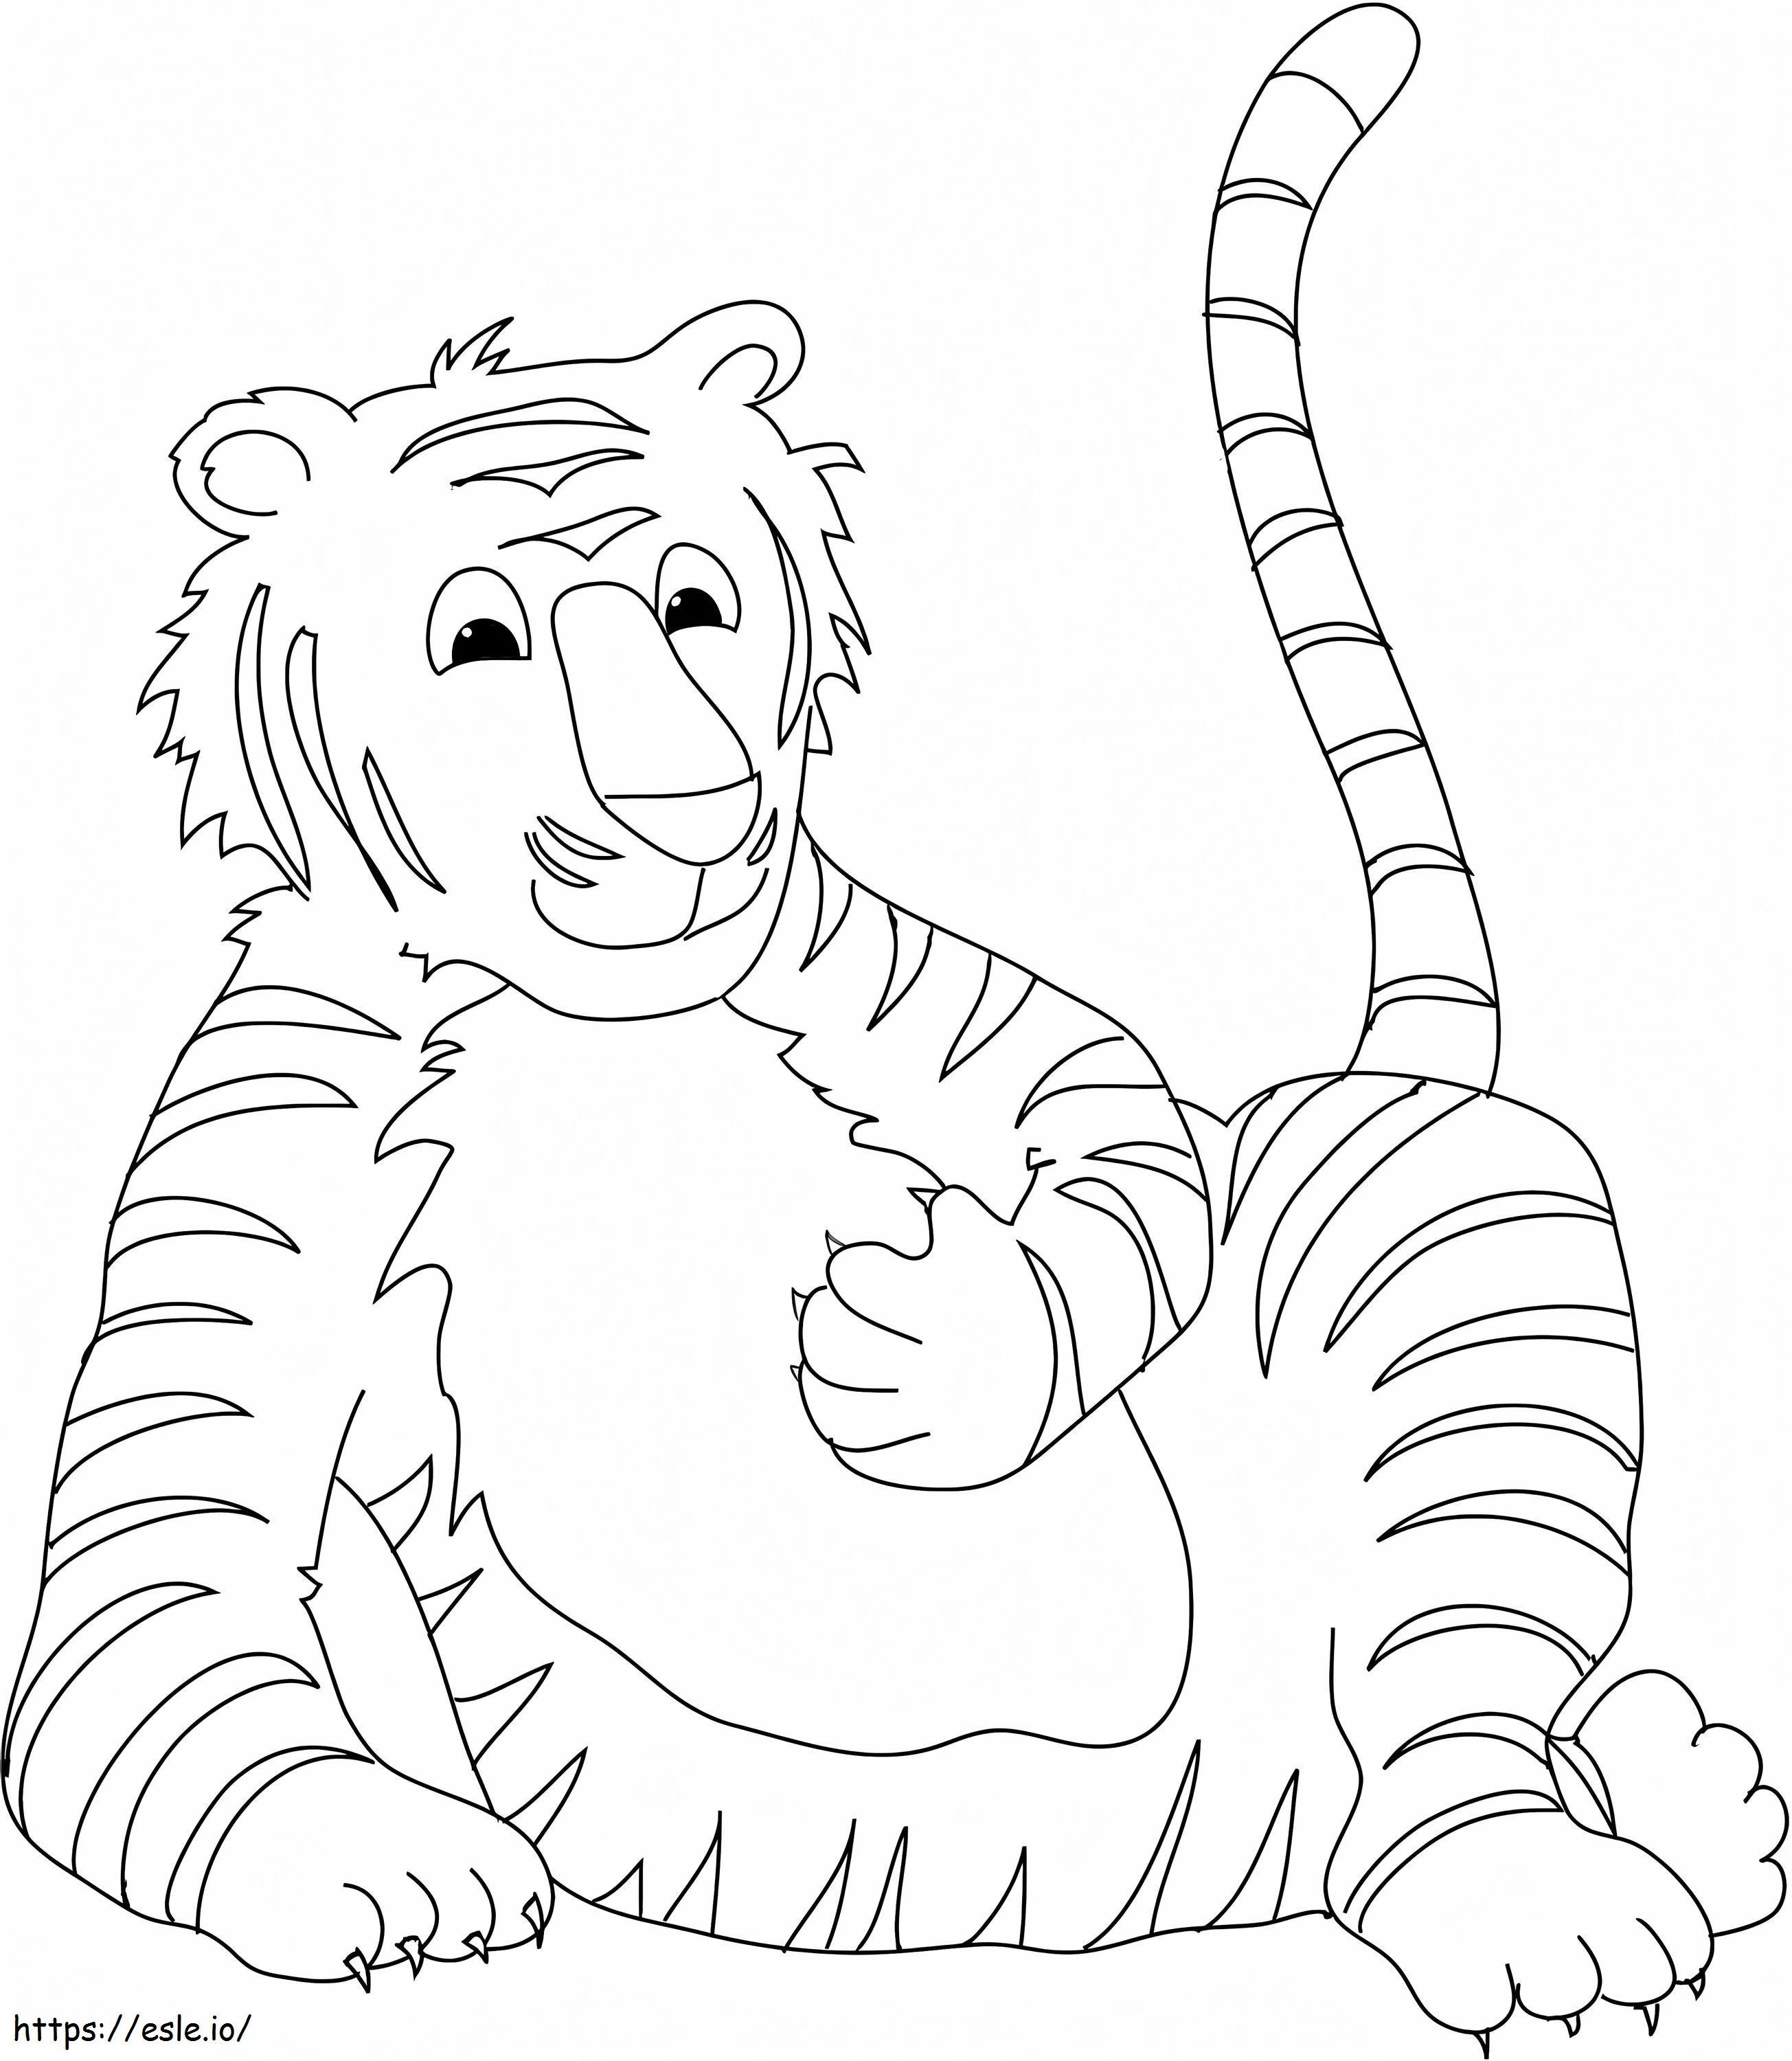 Tiger For Children coloring page